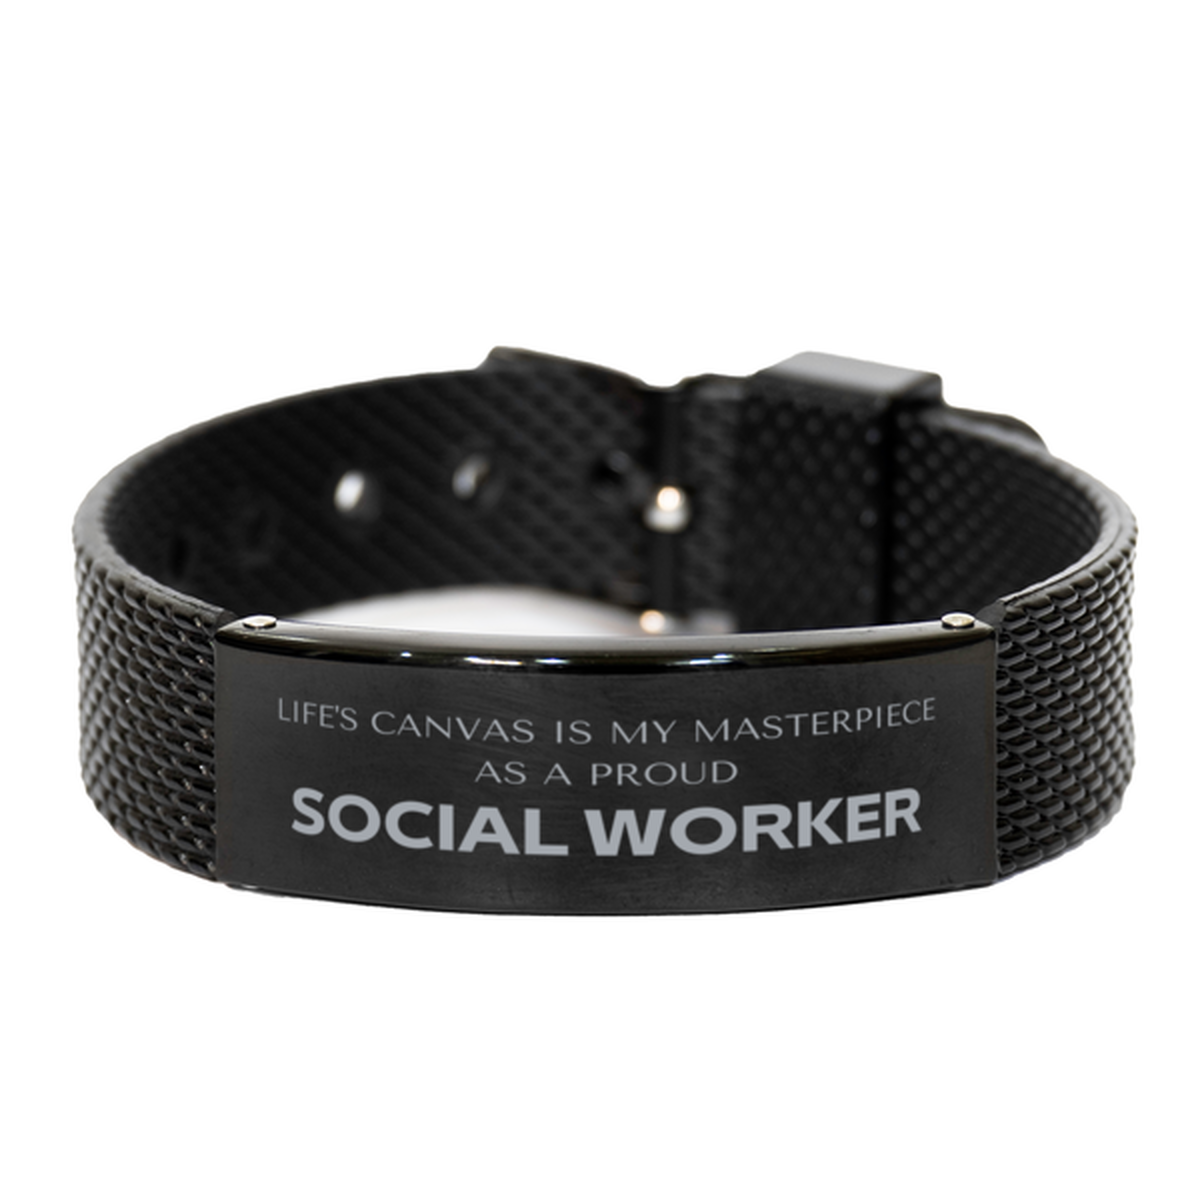 Proud Social Worker Gifts, Life's canvas is my masterpiece, Epic Birthday Christmas Unique Black Shark Mesh Bracelet For Social Worker, Coworkers, Men, Women, Friends